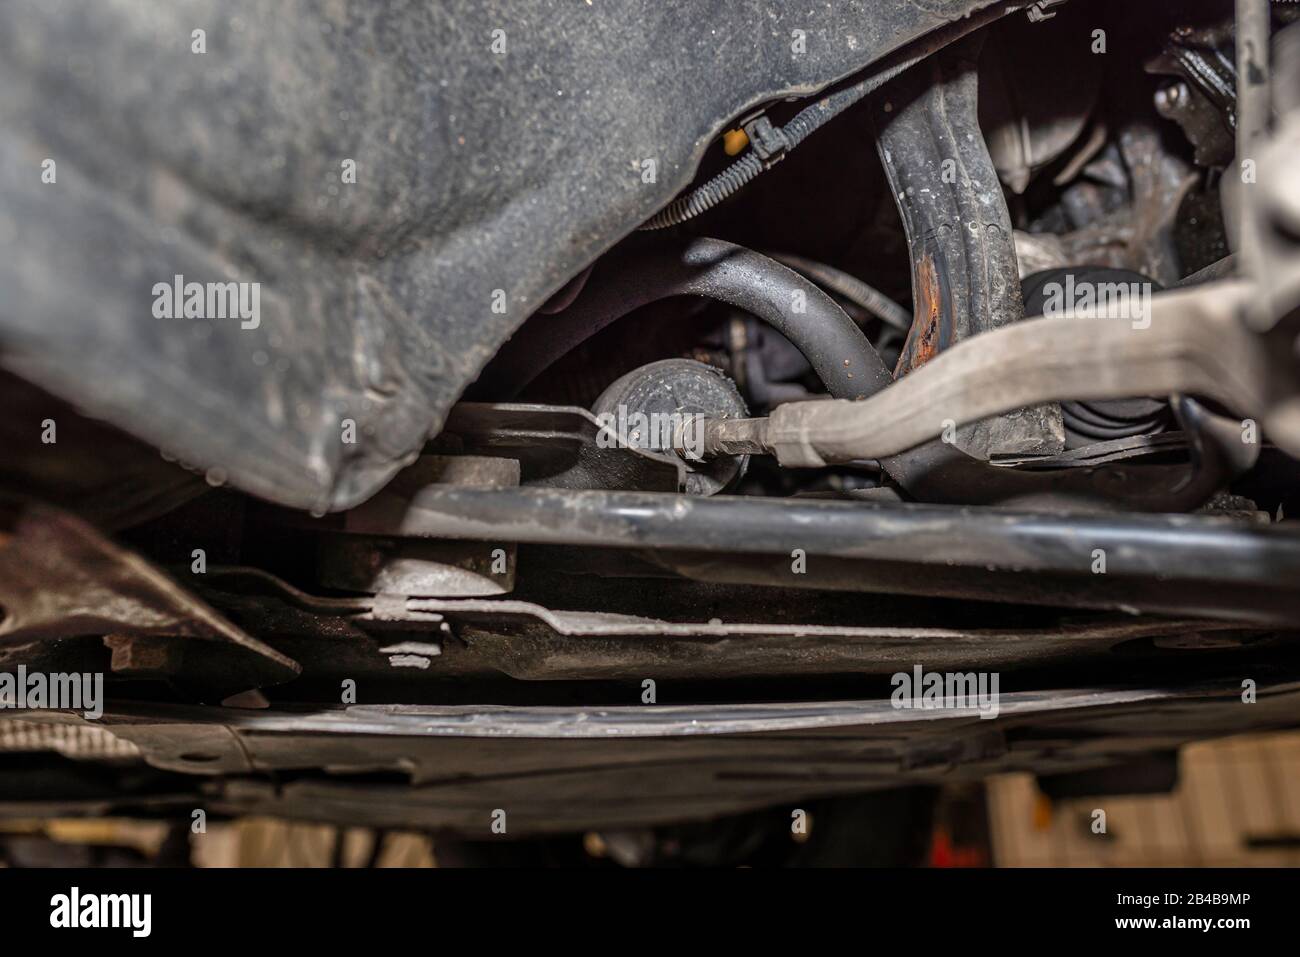 Steering stabilizer connected with steering knuckle, seen from the bottom of the car on a jack in the workshop. Stock Photo